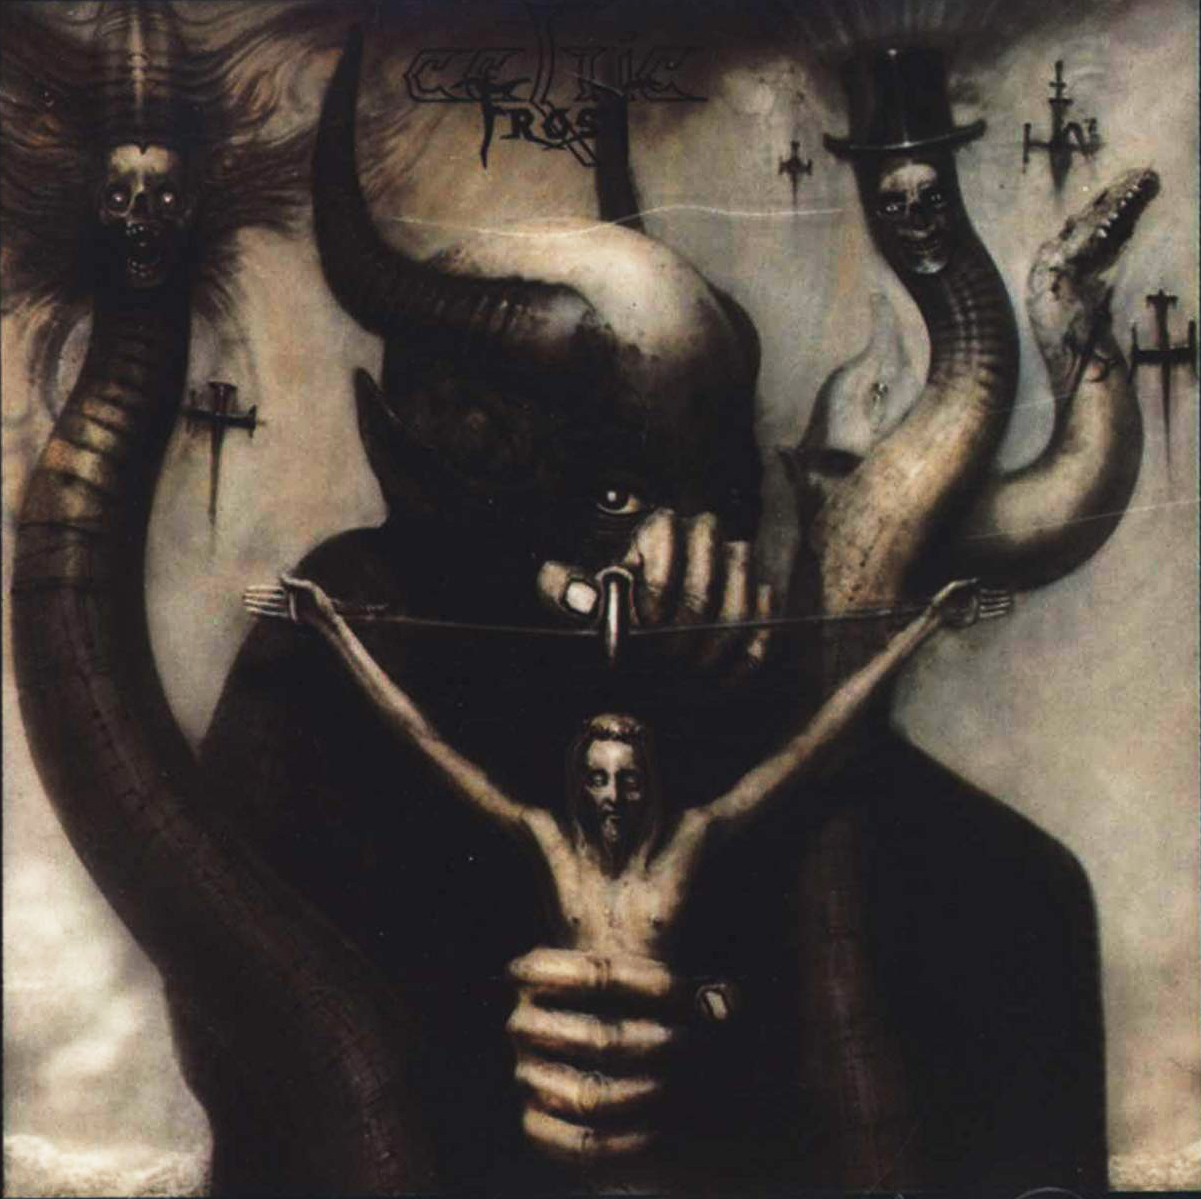 Celtic Frost - 